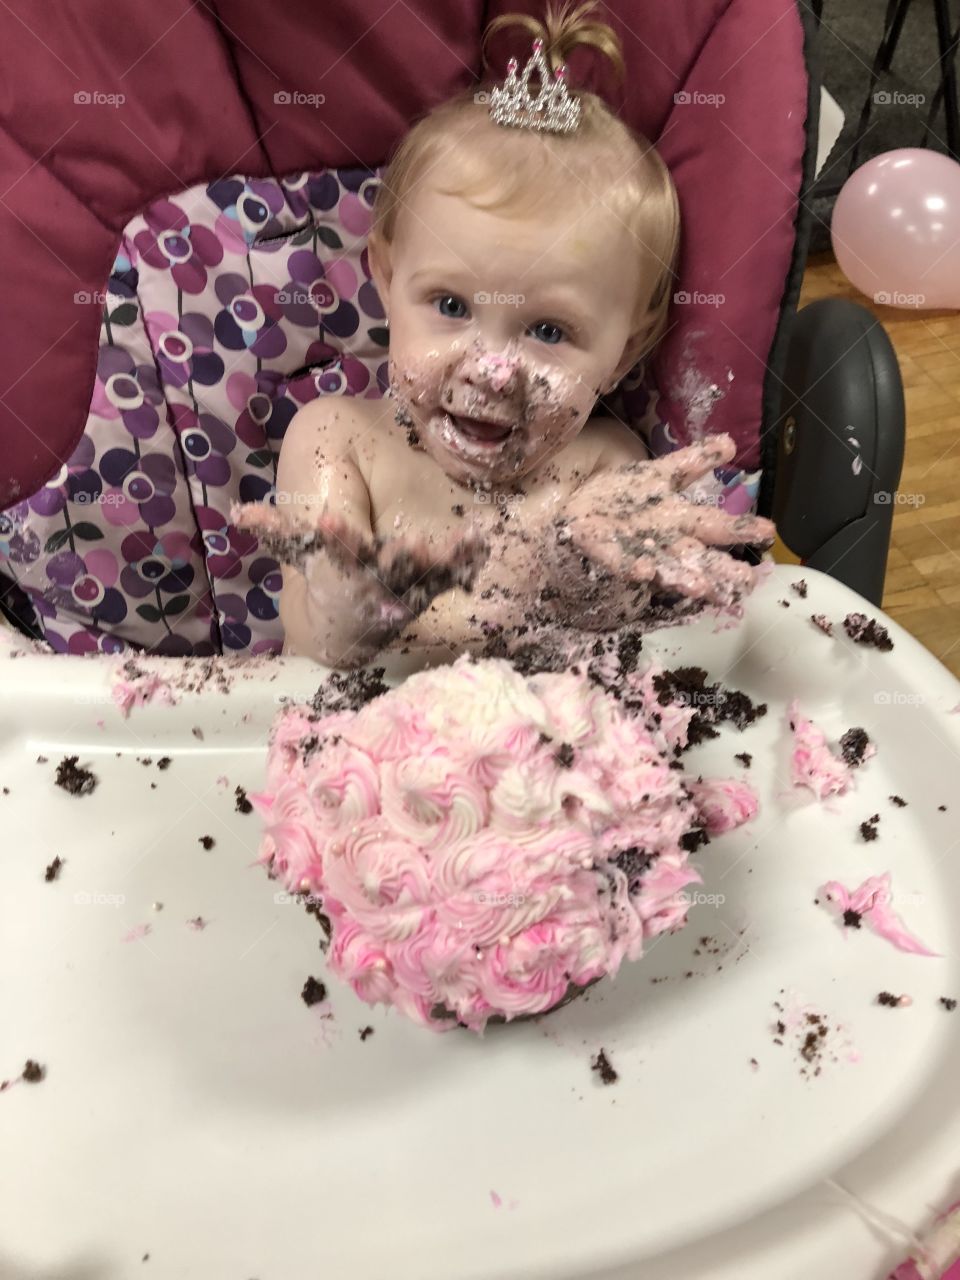 what can i say? i love me some cake! 